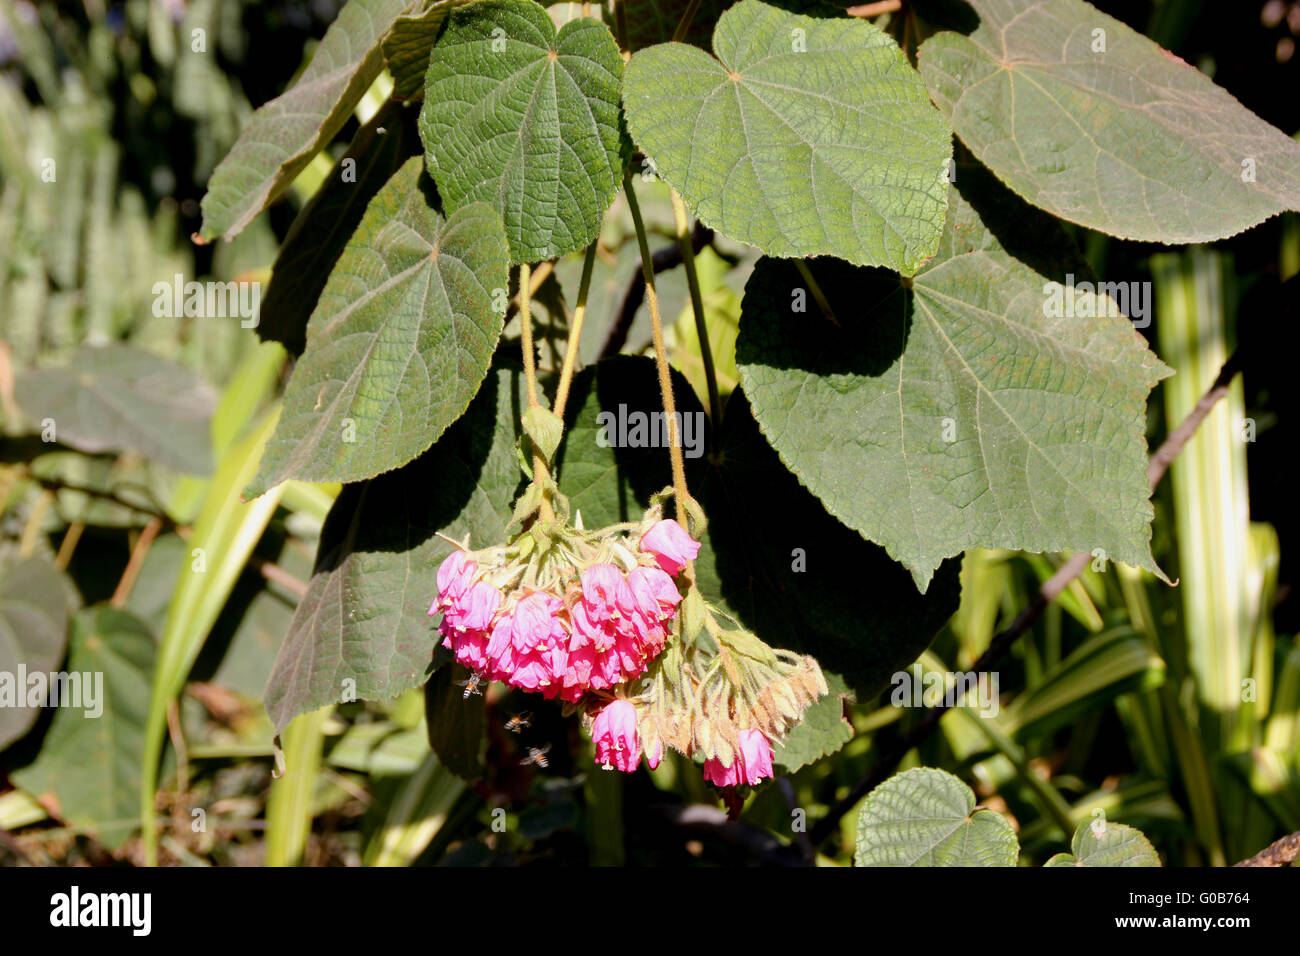 Dombeya wallichii, Pink Ball Tree, Tropical Hydrangea,  tree with heart shaped serrated leaves and pink flowers Stock Photo